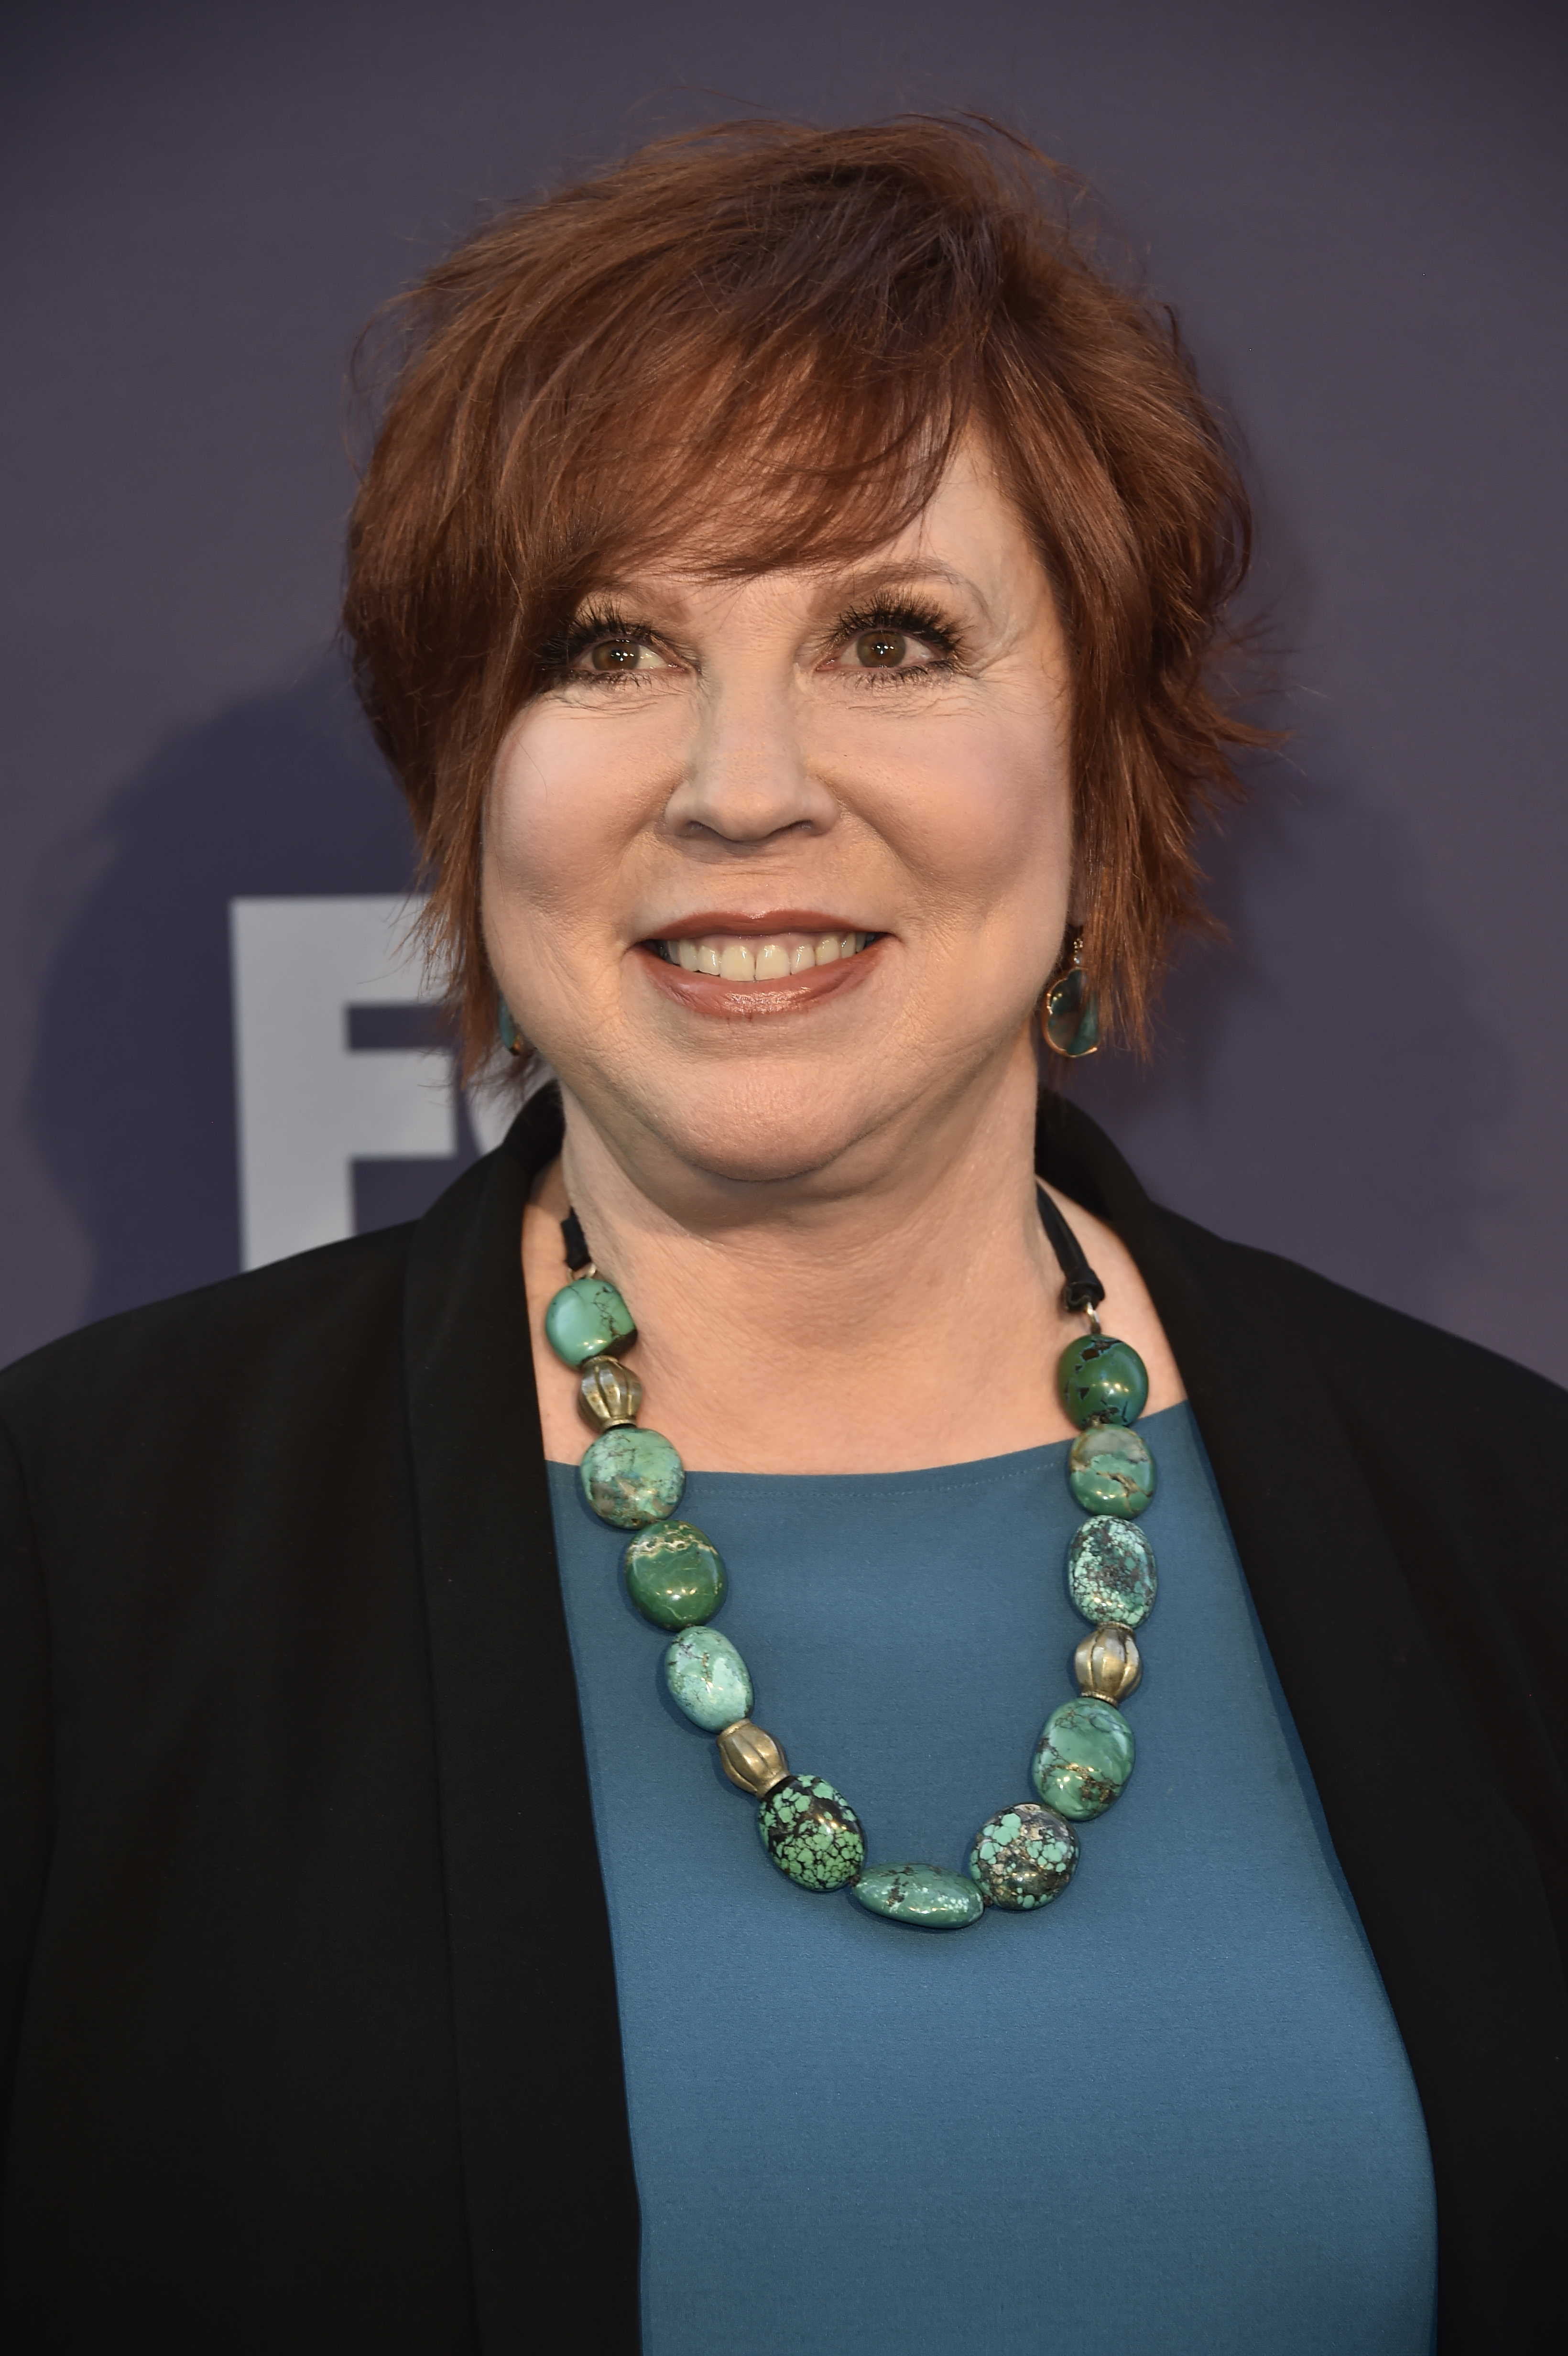 Vicki Lawrence attends FOX Summer TCA All-Star Party at Soho House in West Hollywood, California, on August 2, 2018. | Source: Getty Images